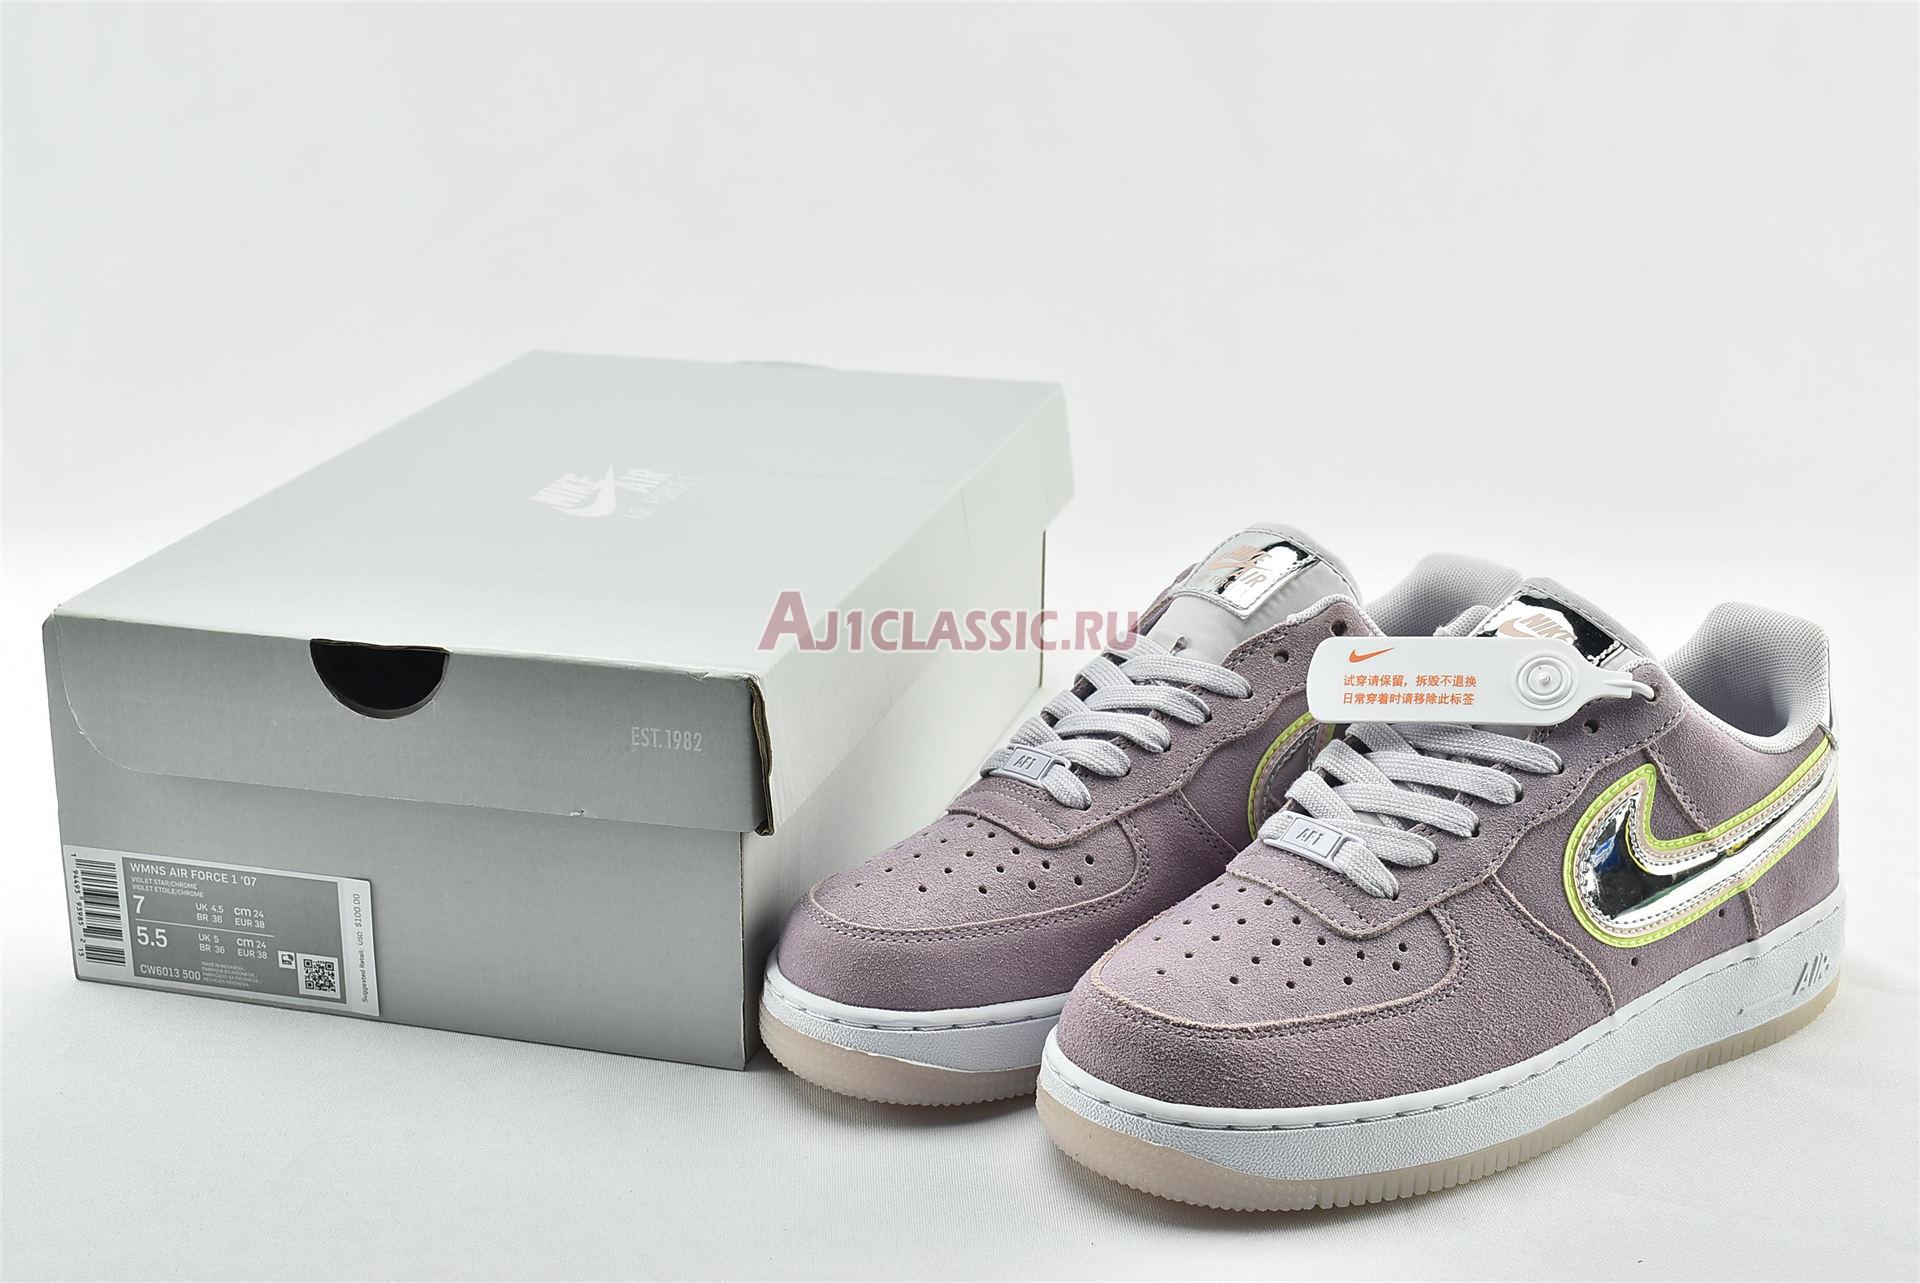 Nike Air Force 1 Low "P(HER)SPECTIVE" CW6013-500